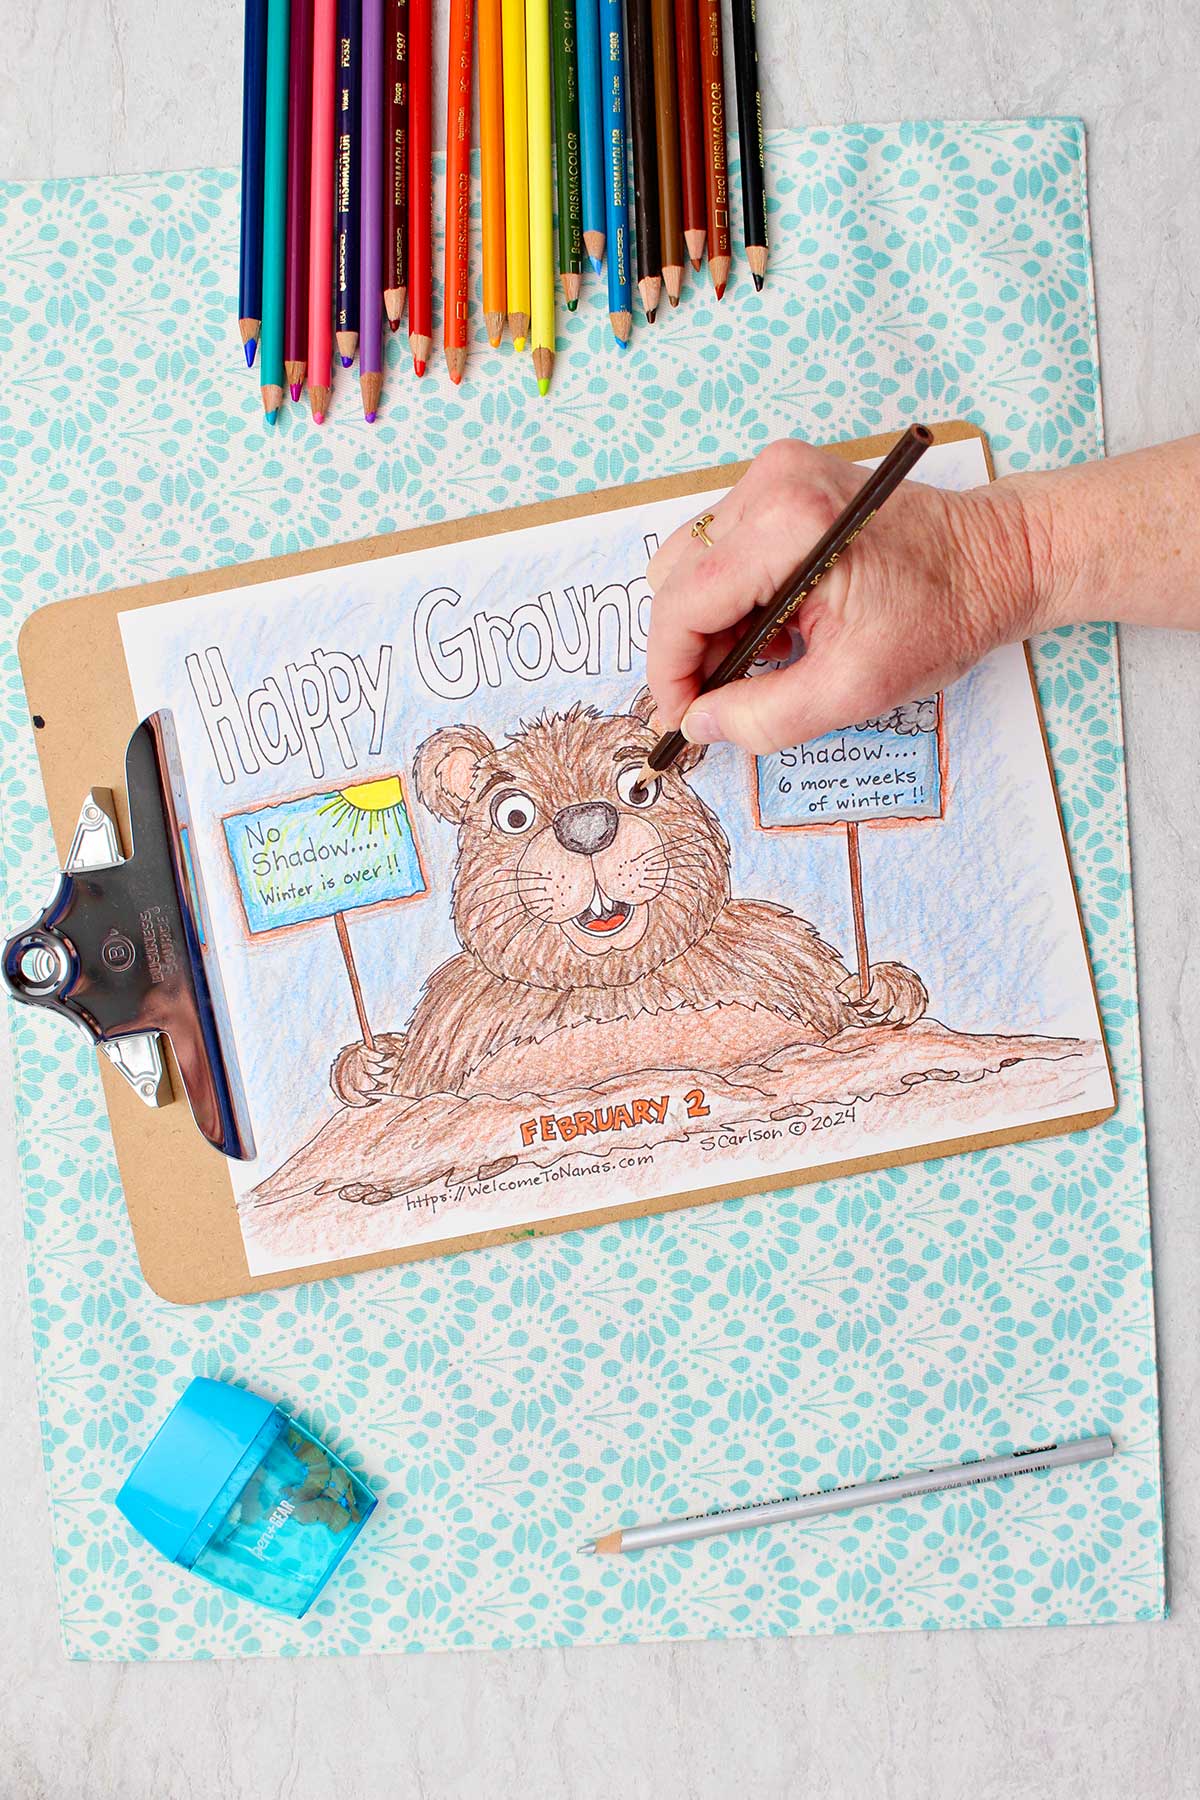 Hand coloring the eyes of the groundhog brown with colored pencils and a pencil sharpener near by.